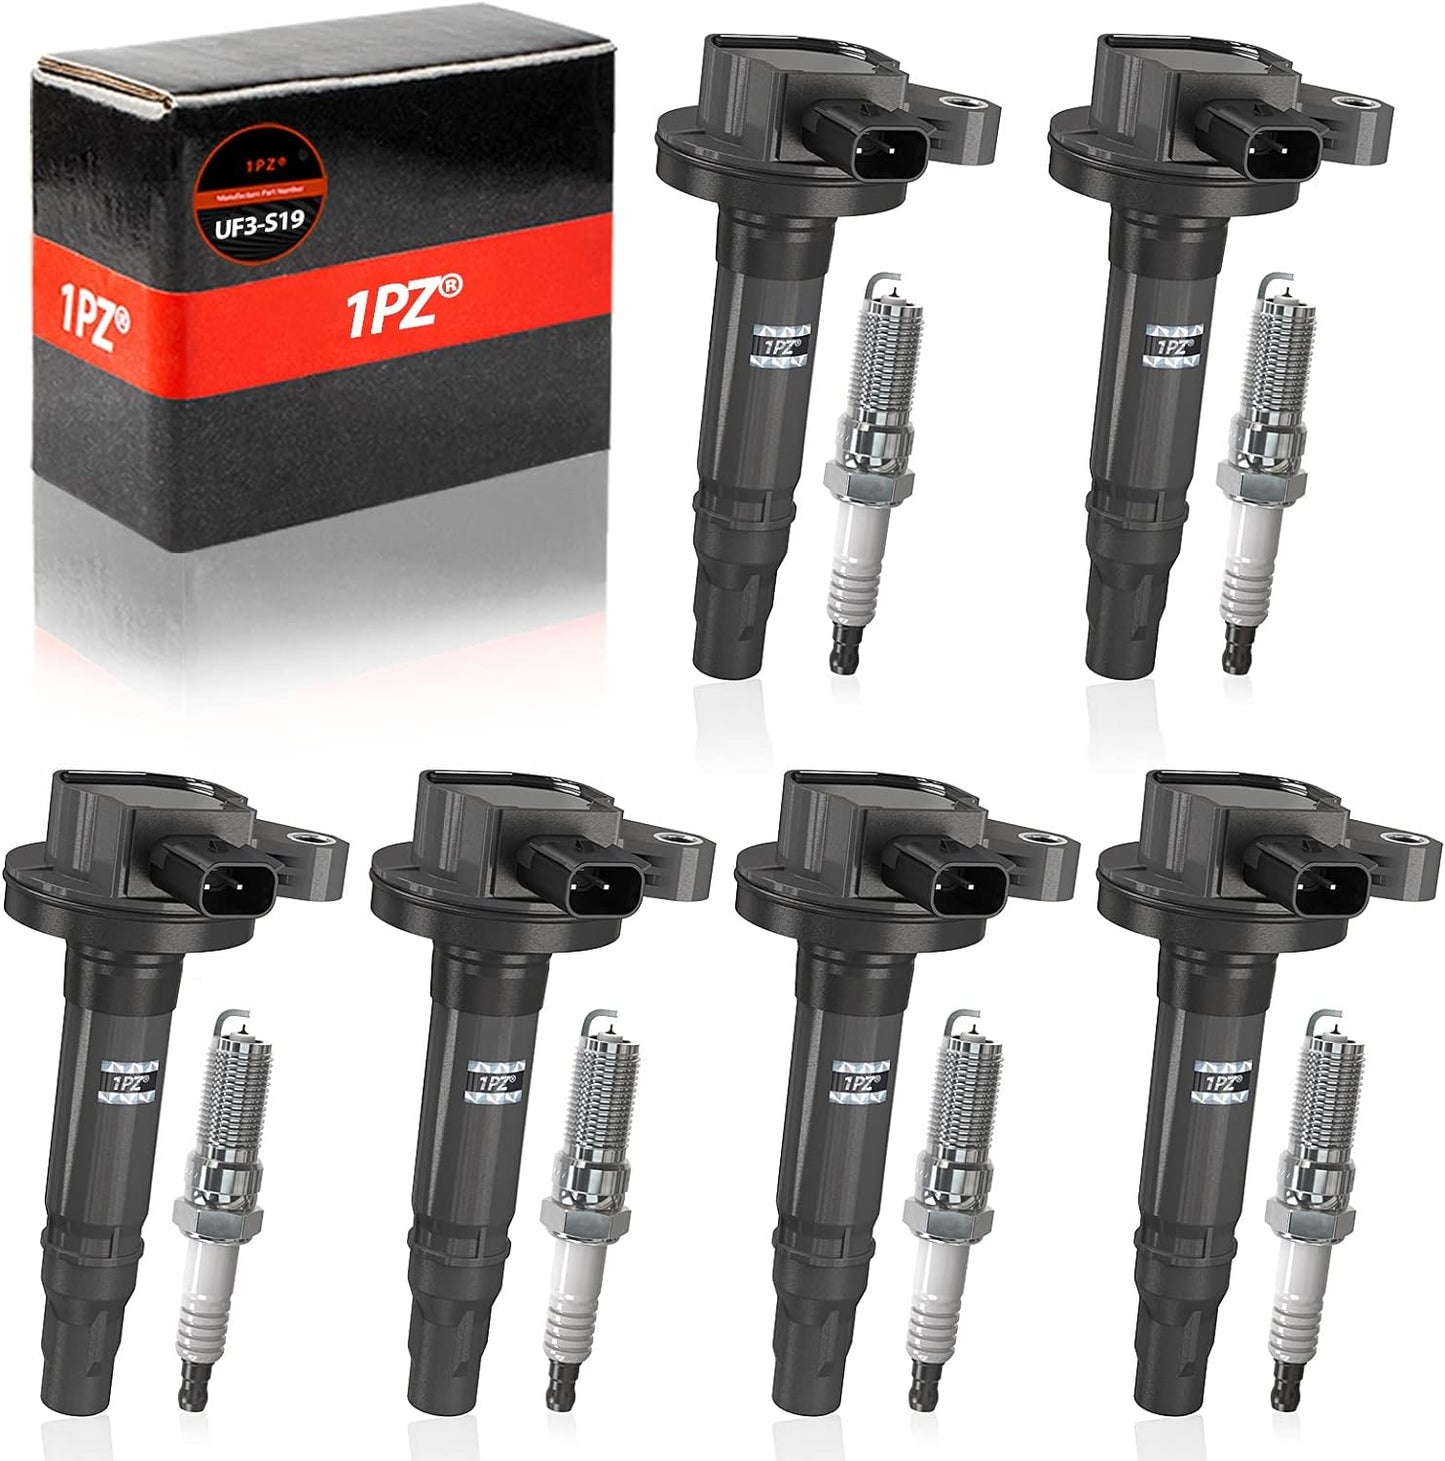 1PZ UF3-S19 Set of 6 Ignition Coils Pack UF553 7T4Z-12029-E & Spark Plugs 5019 Replacement for Ford Flex Taurus Edge Lincoln MKS MKT MKZ MKX Mercury Sable 3.5L 3.7L V6 OEM DG520 UF553 GN10237 C1595